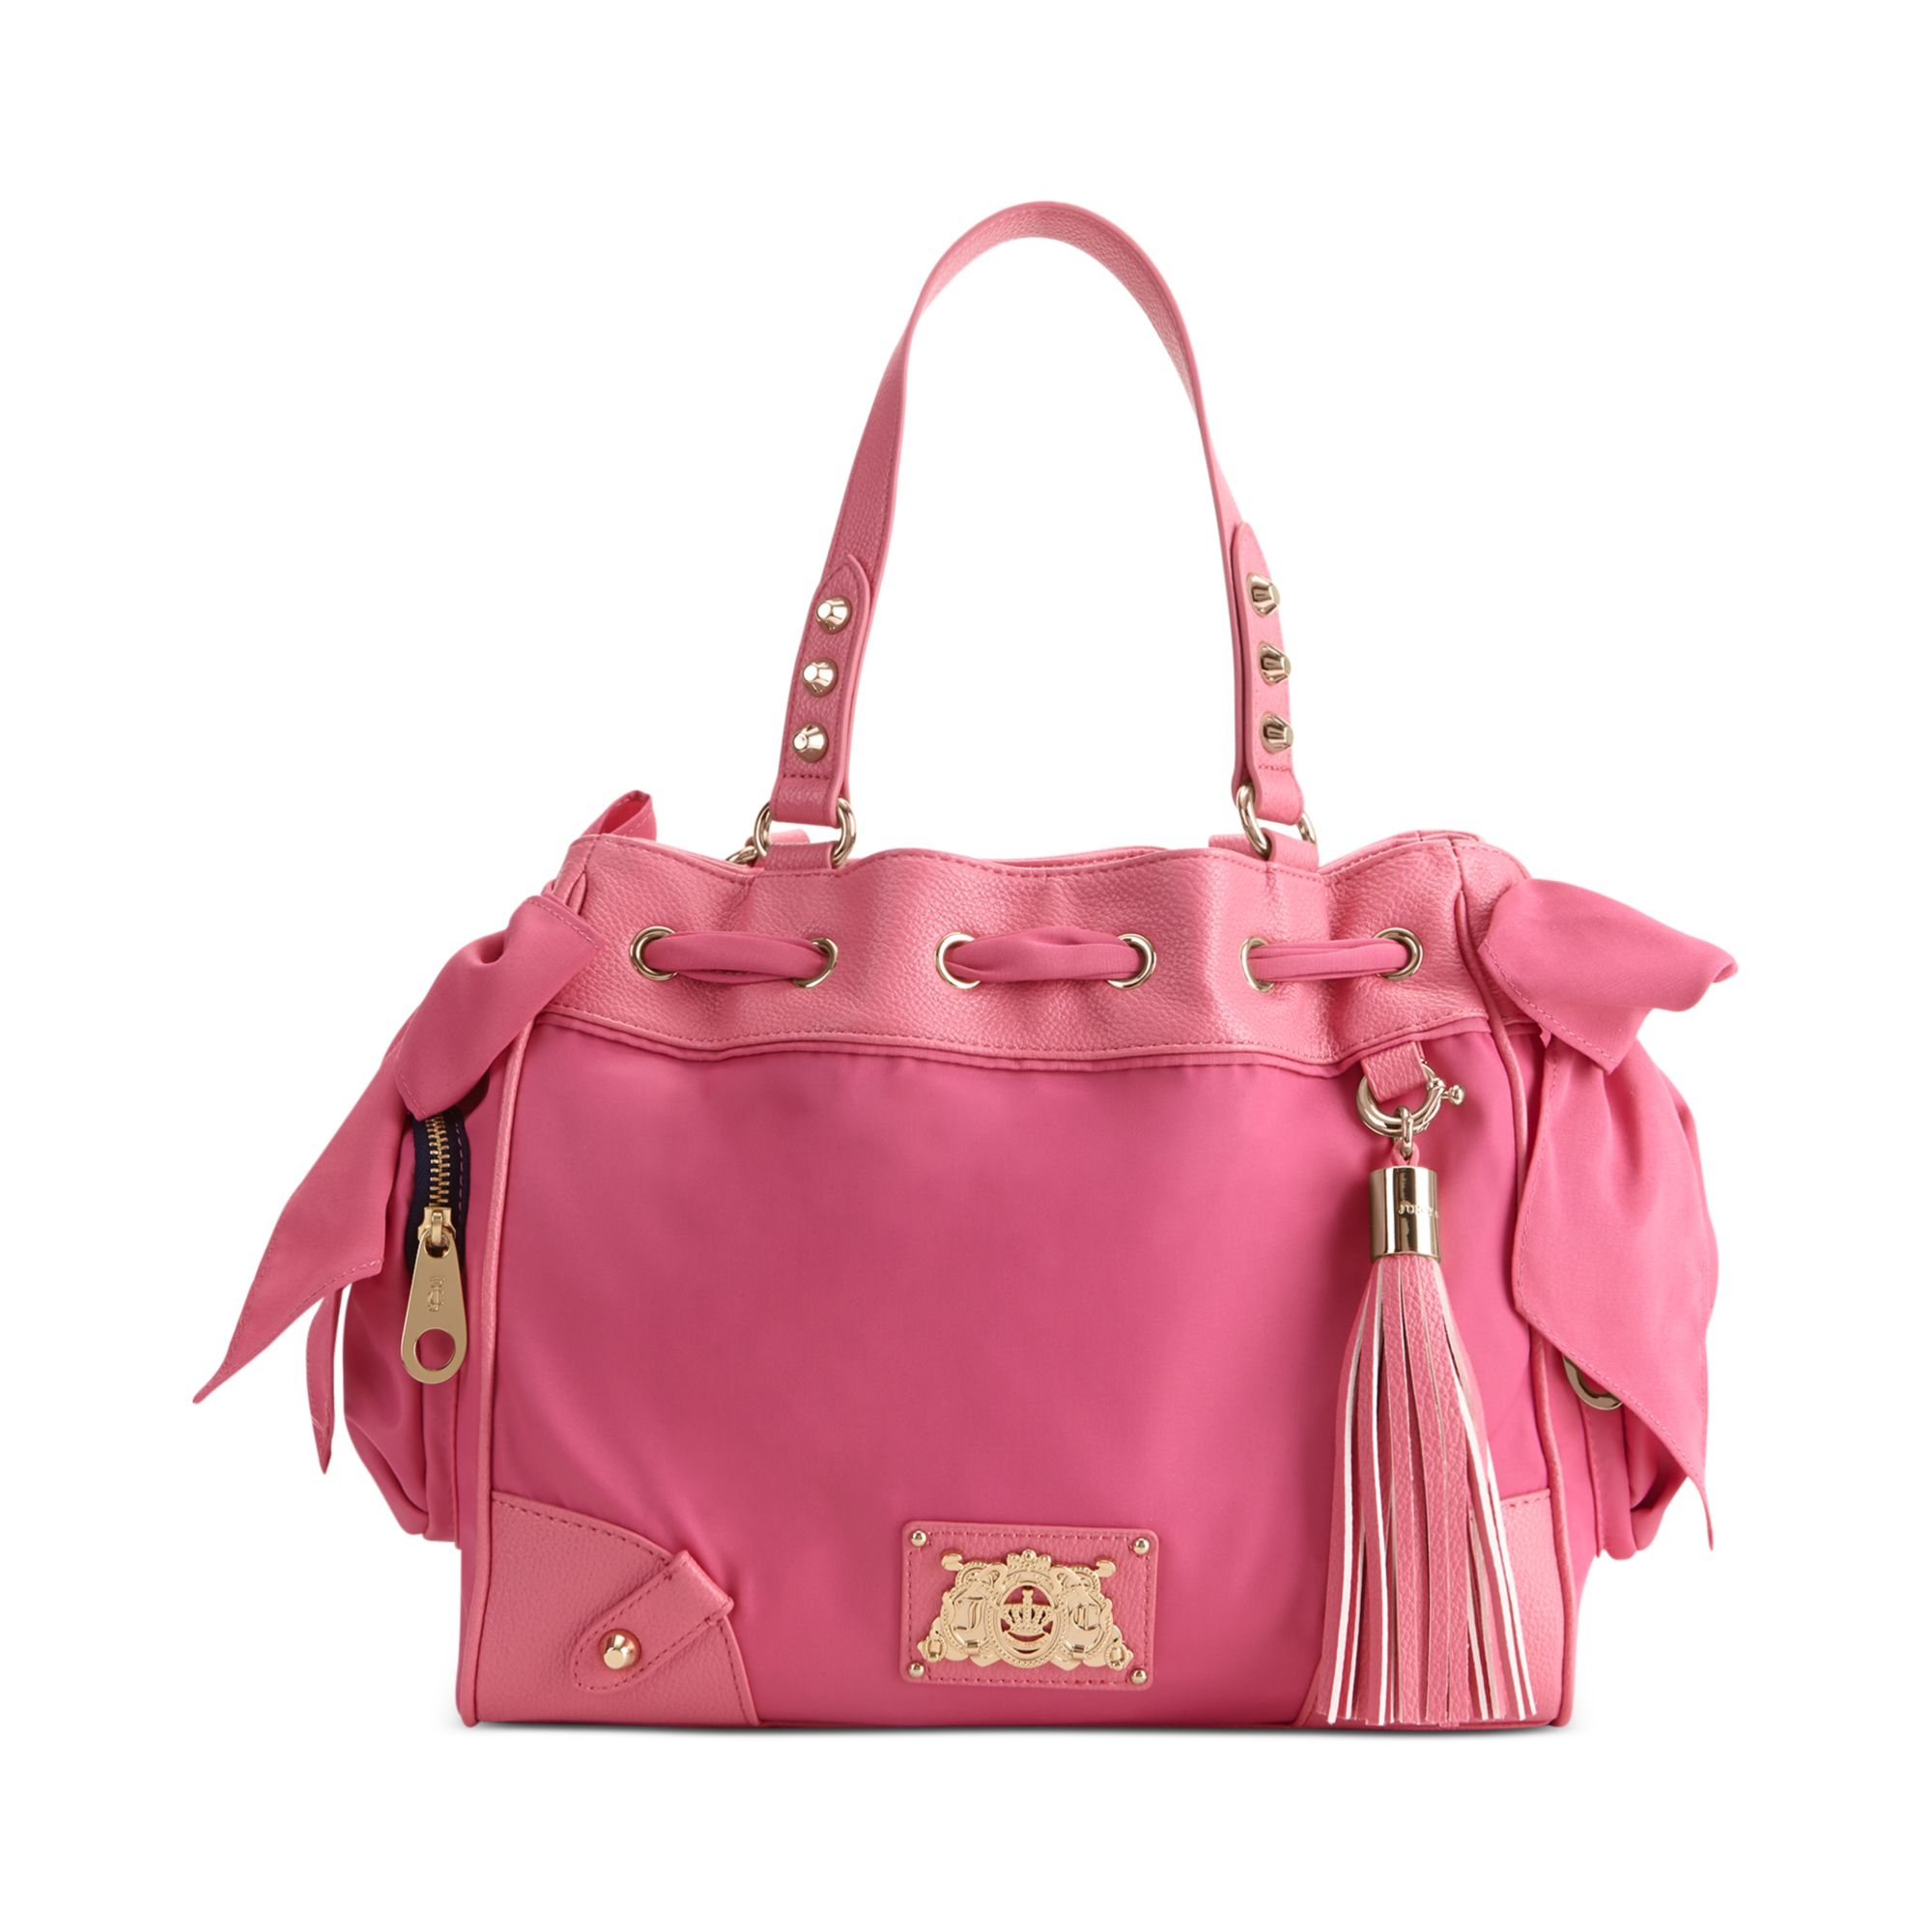 Juicy Couture Daydreamer Bag at cheap.